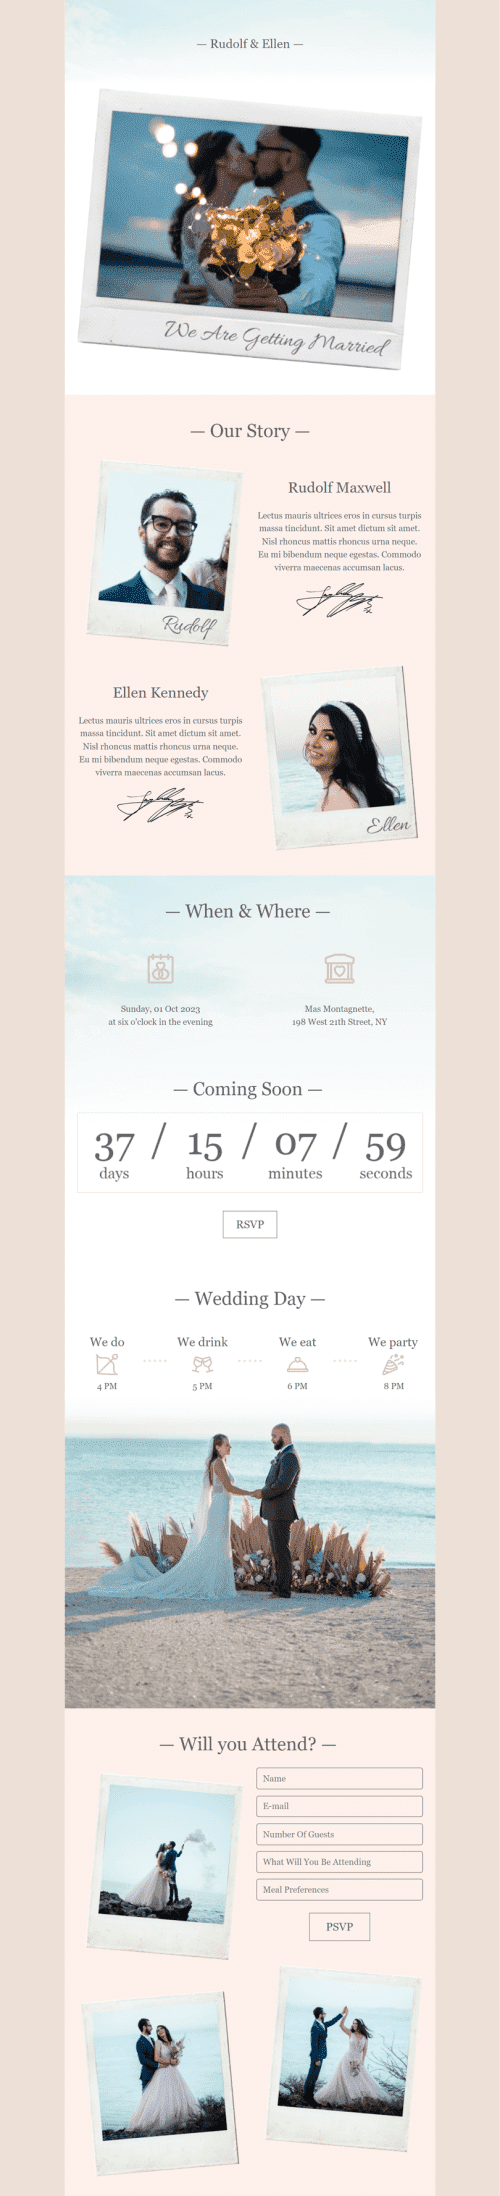 Wedding Invitation Email Template "We are getting married" for Photographer industry mobile view